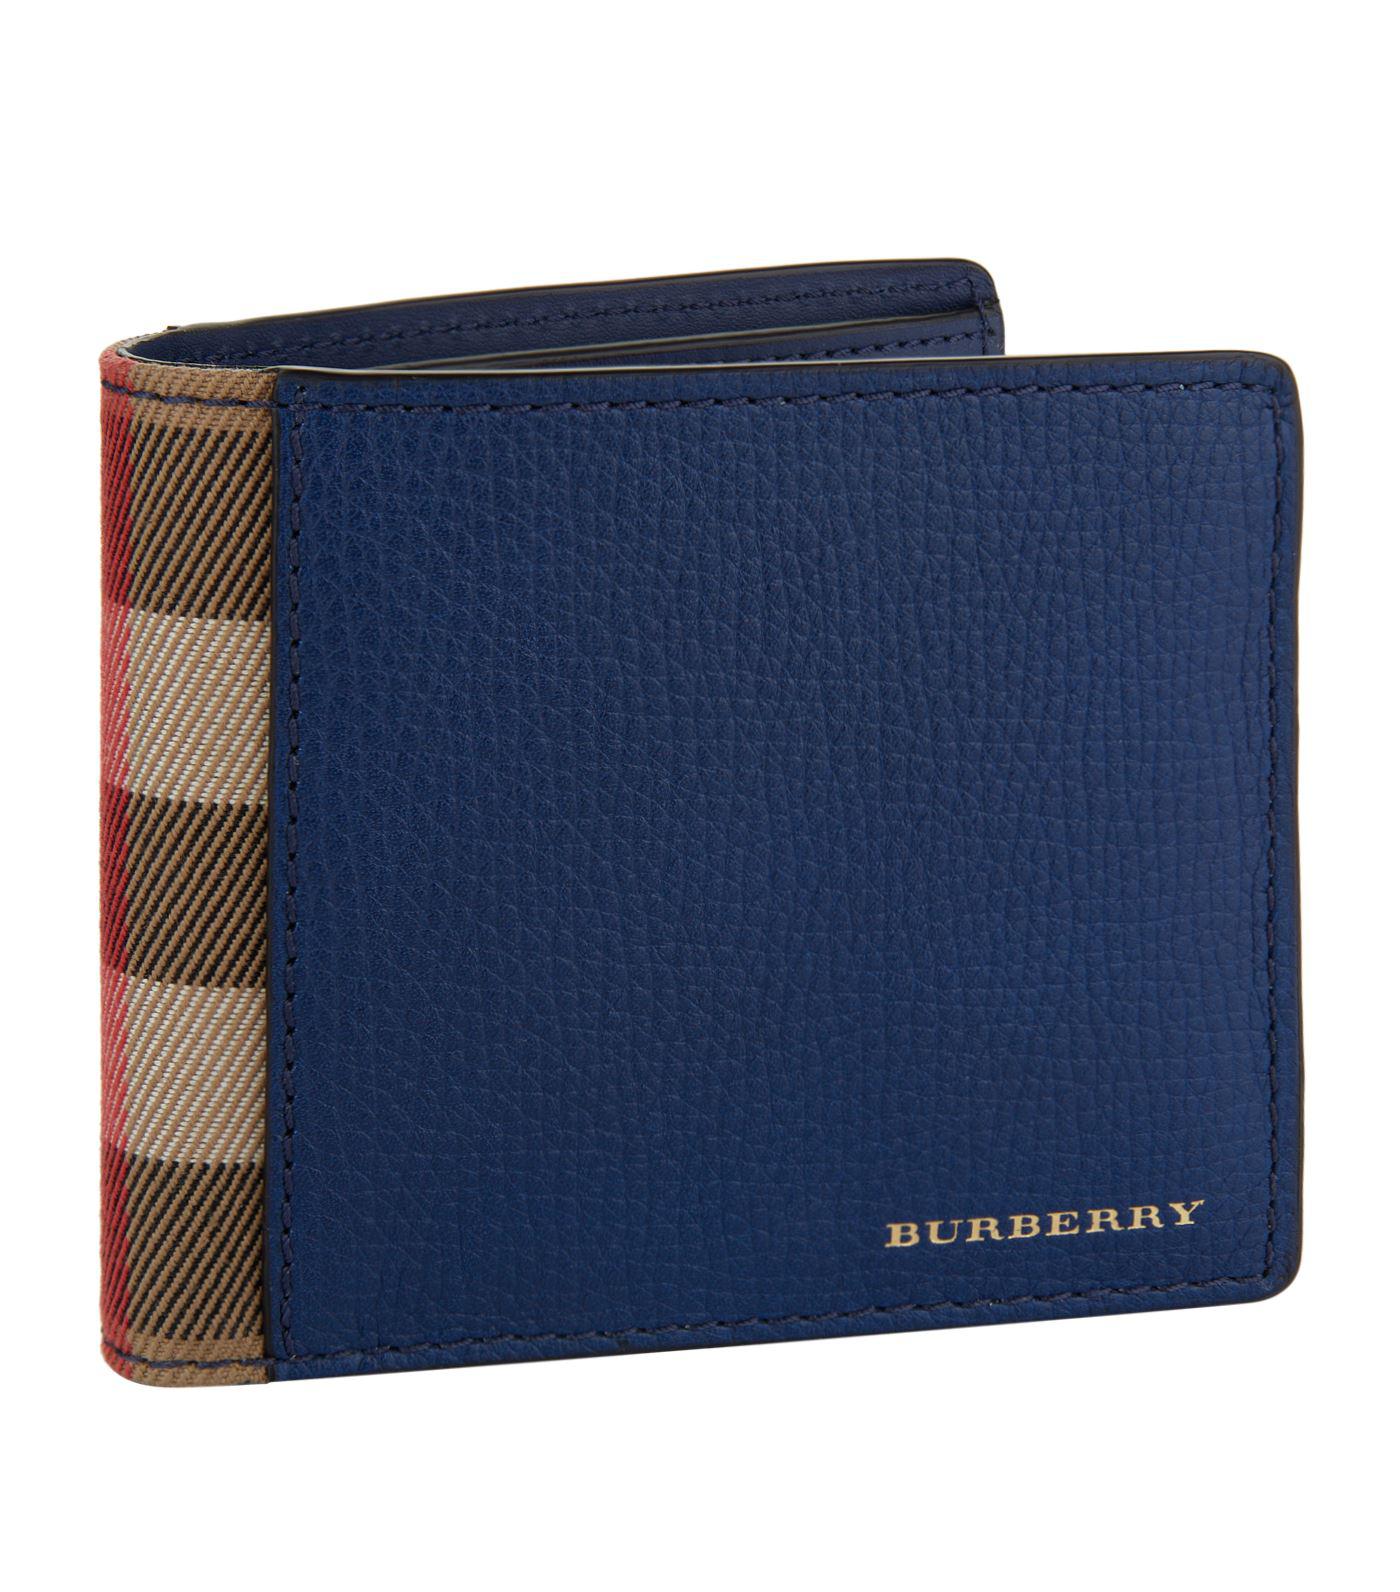 Burberry Check Trim Bifold Wallet, Blue, One Size for Men - Lyst